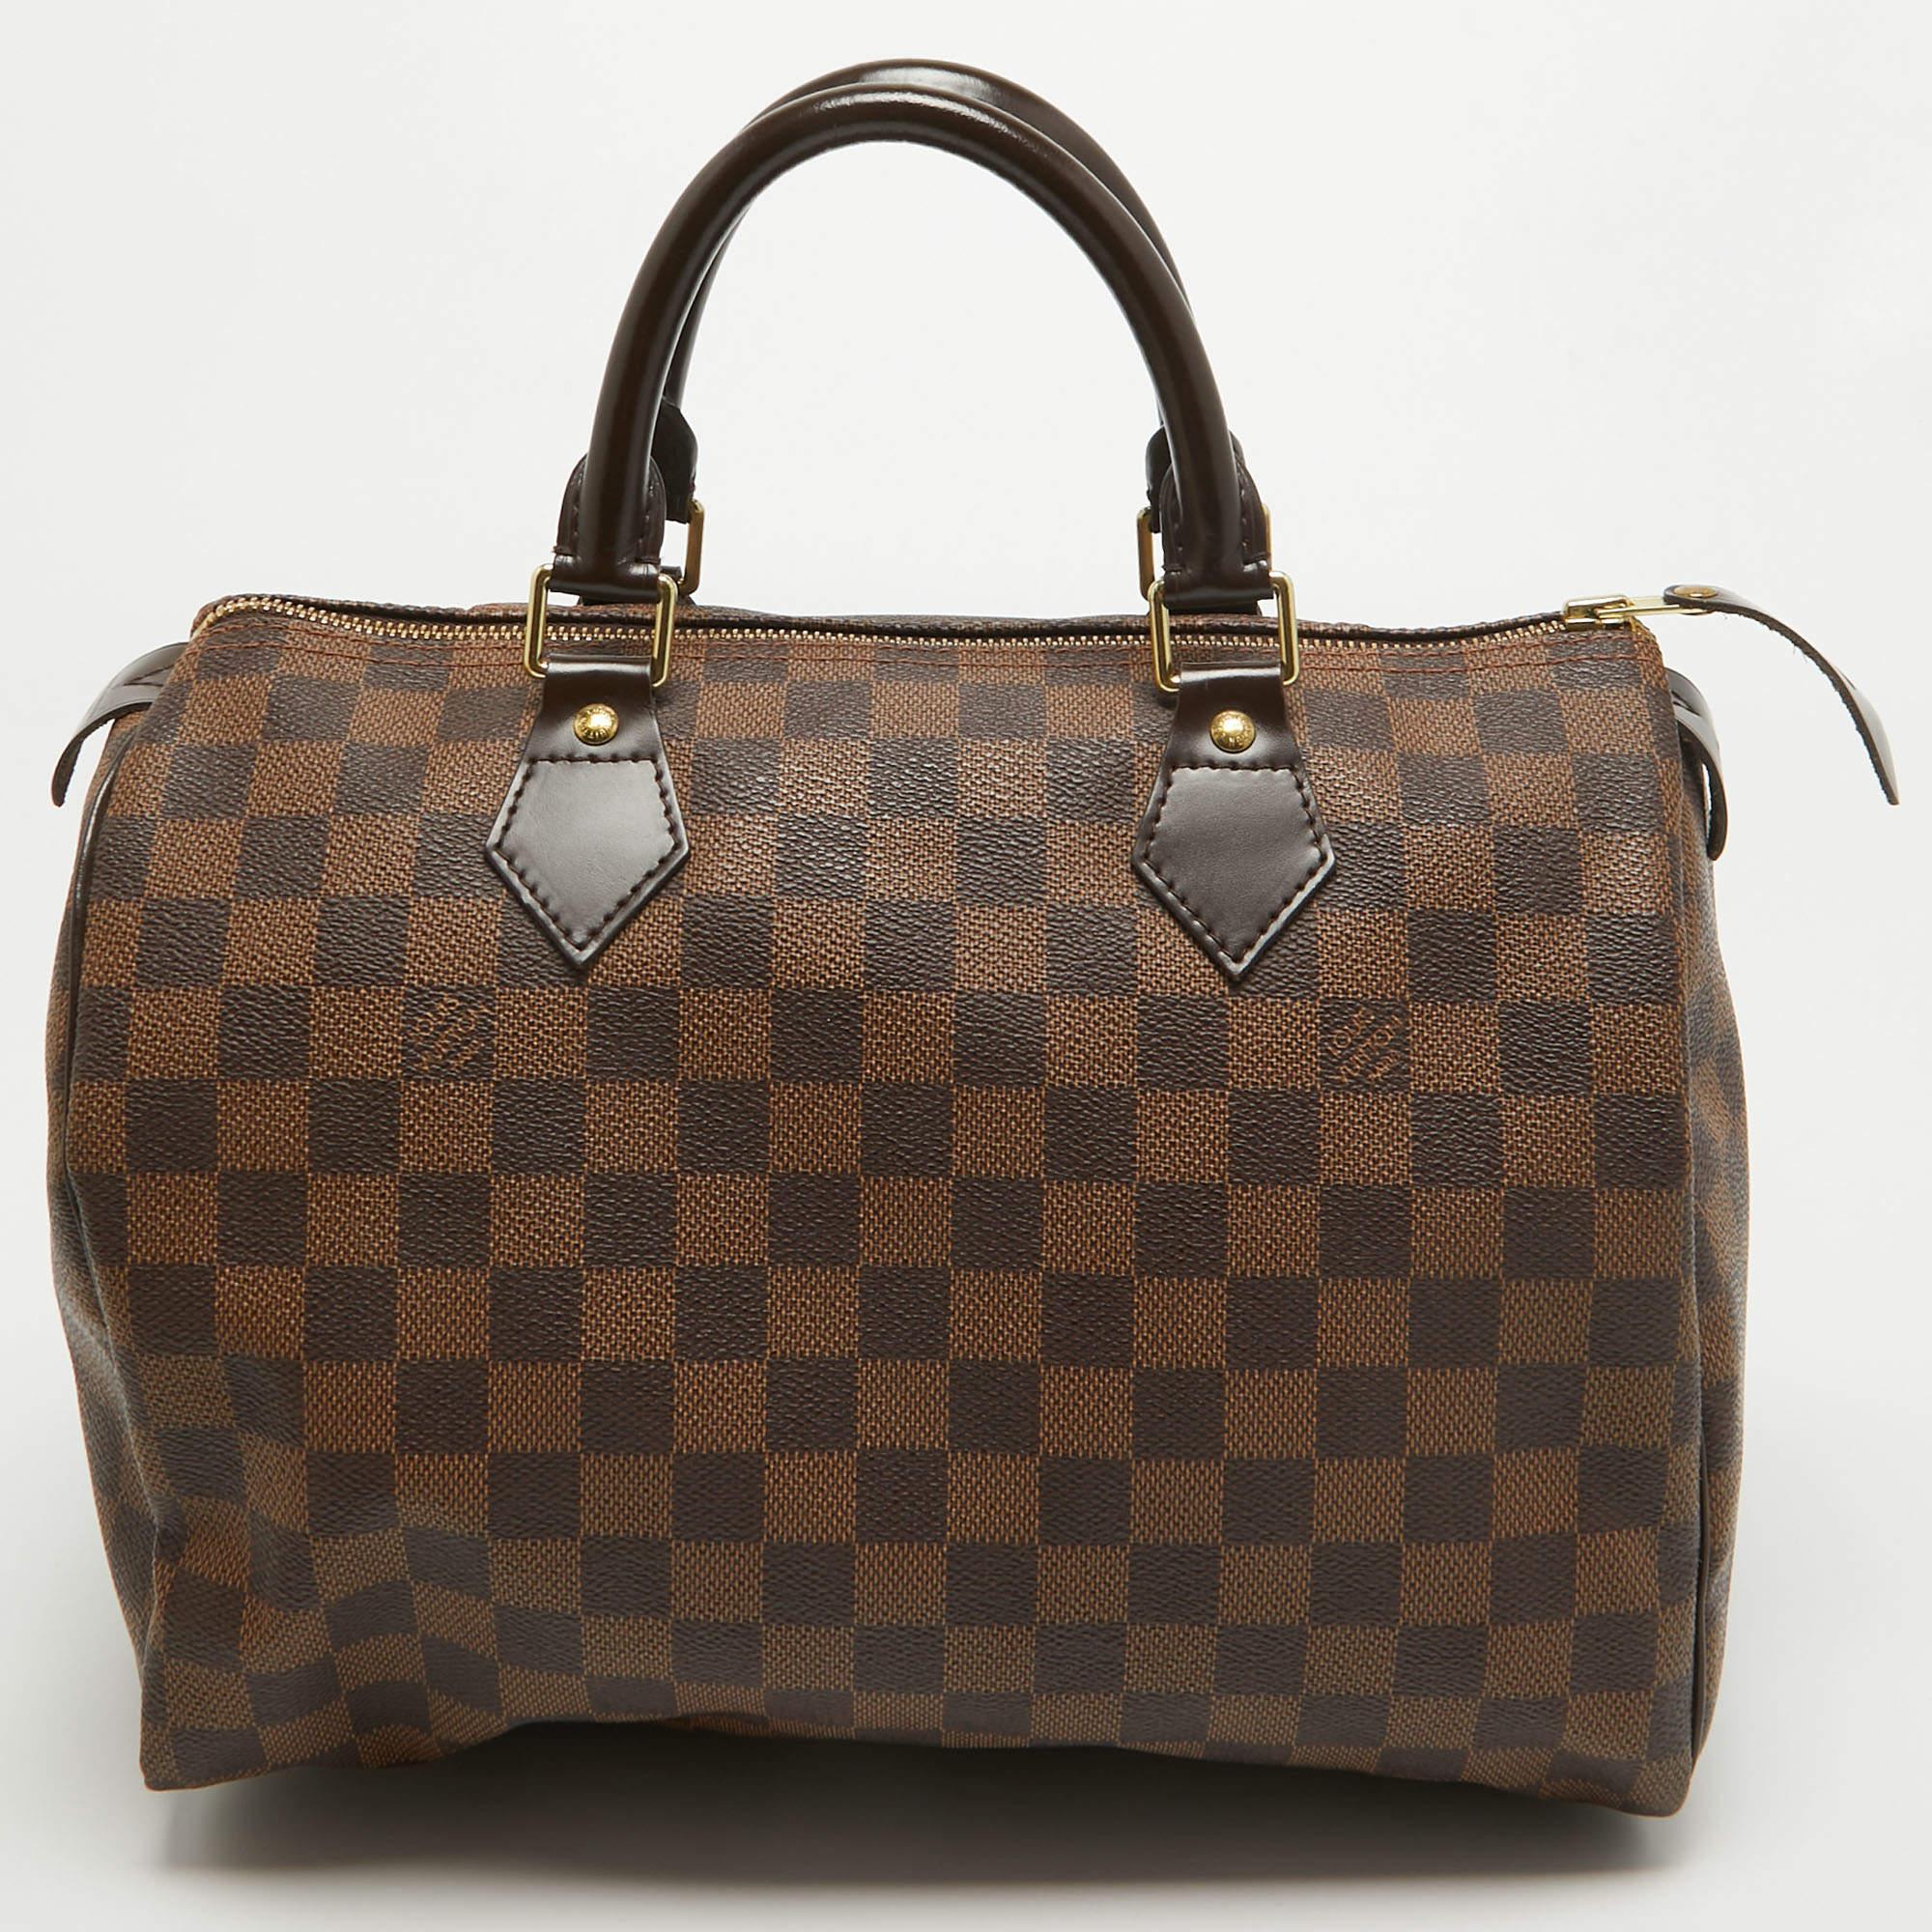 Titled as one of the greatest handbags in the history of luxury fashion, the Speedy from Louis Vuitton was first created for everyday use as a smaller version of their famous Keepall bag. This Speedy comes crafted from signature Damier Ebene coated